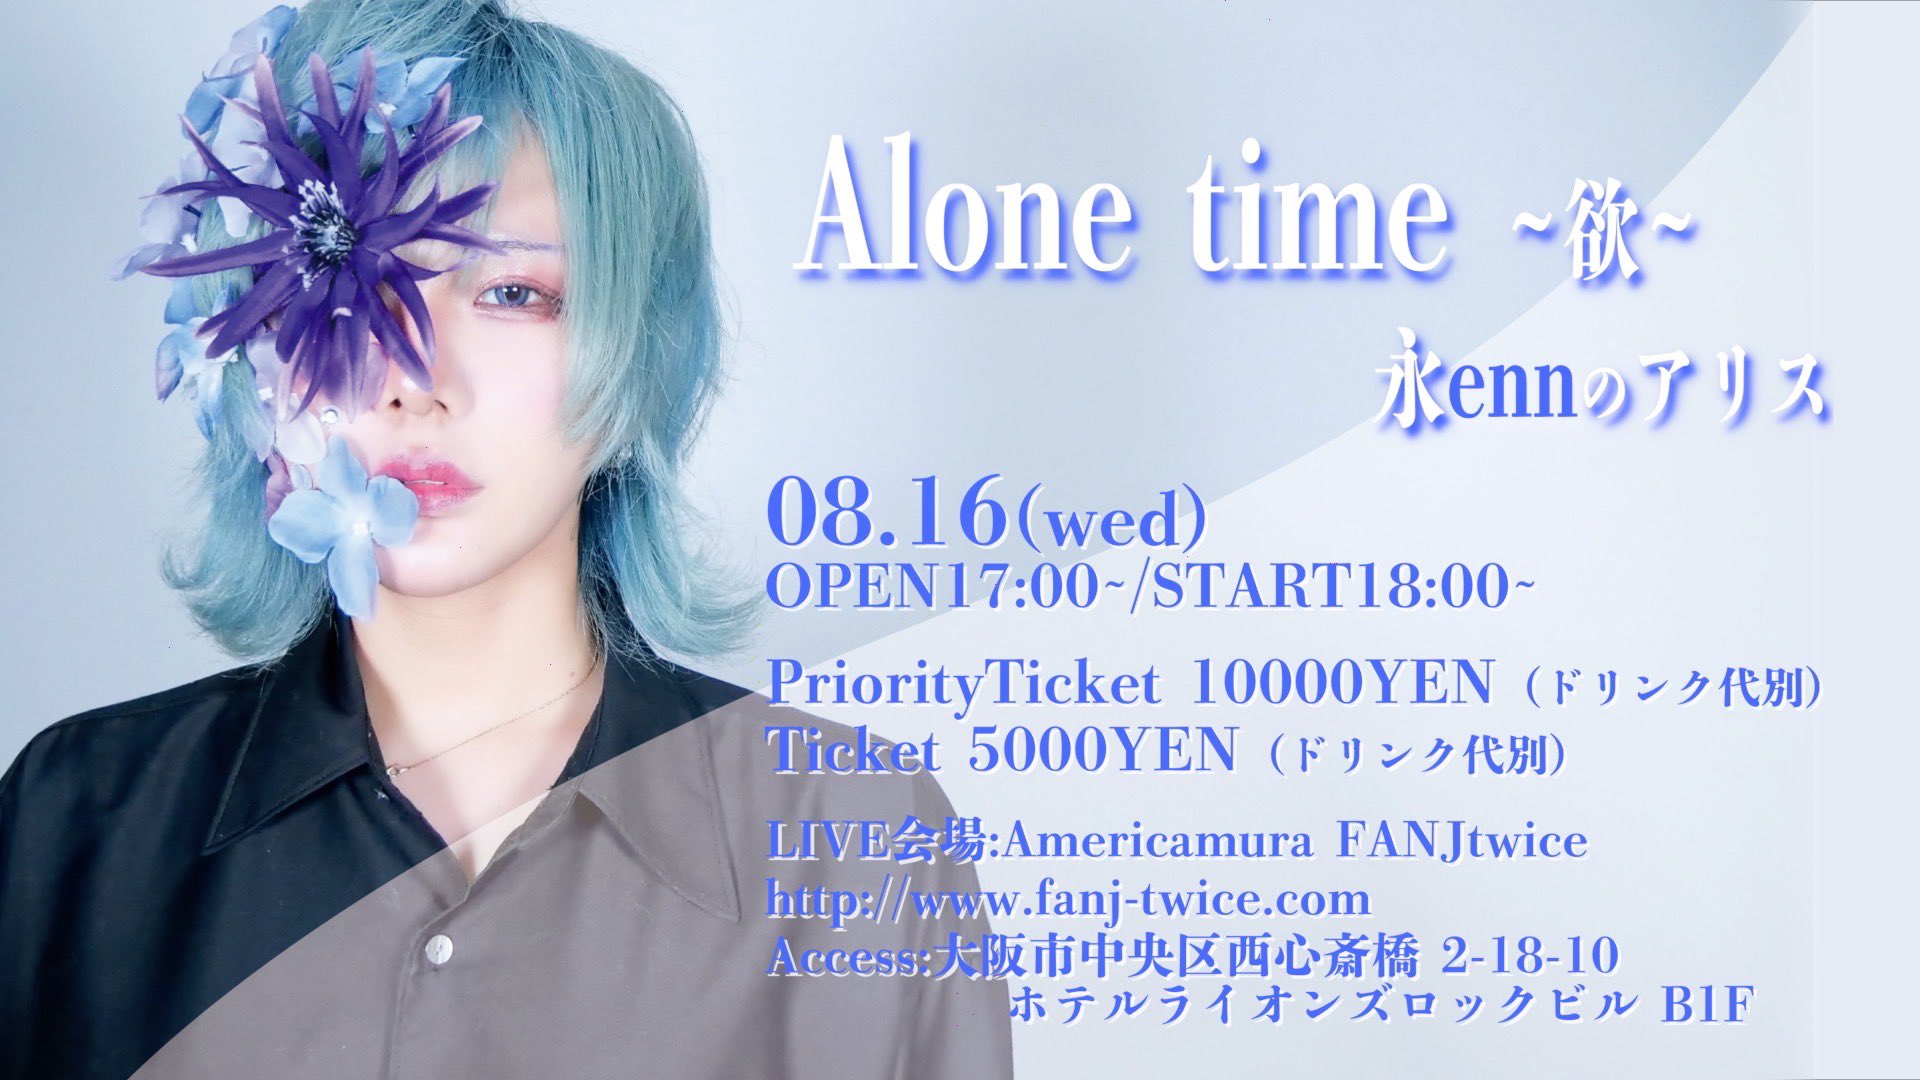 Alone time〜欲〜 フォーエイト-